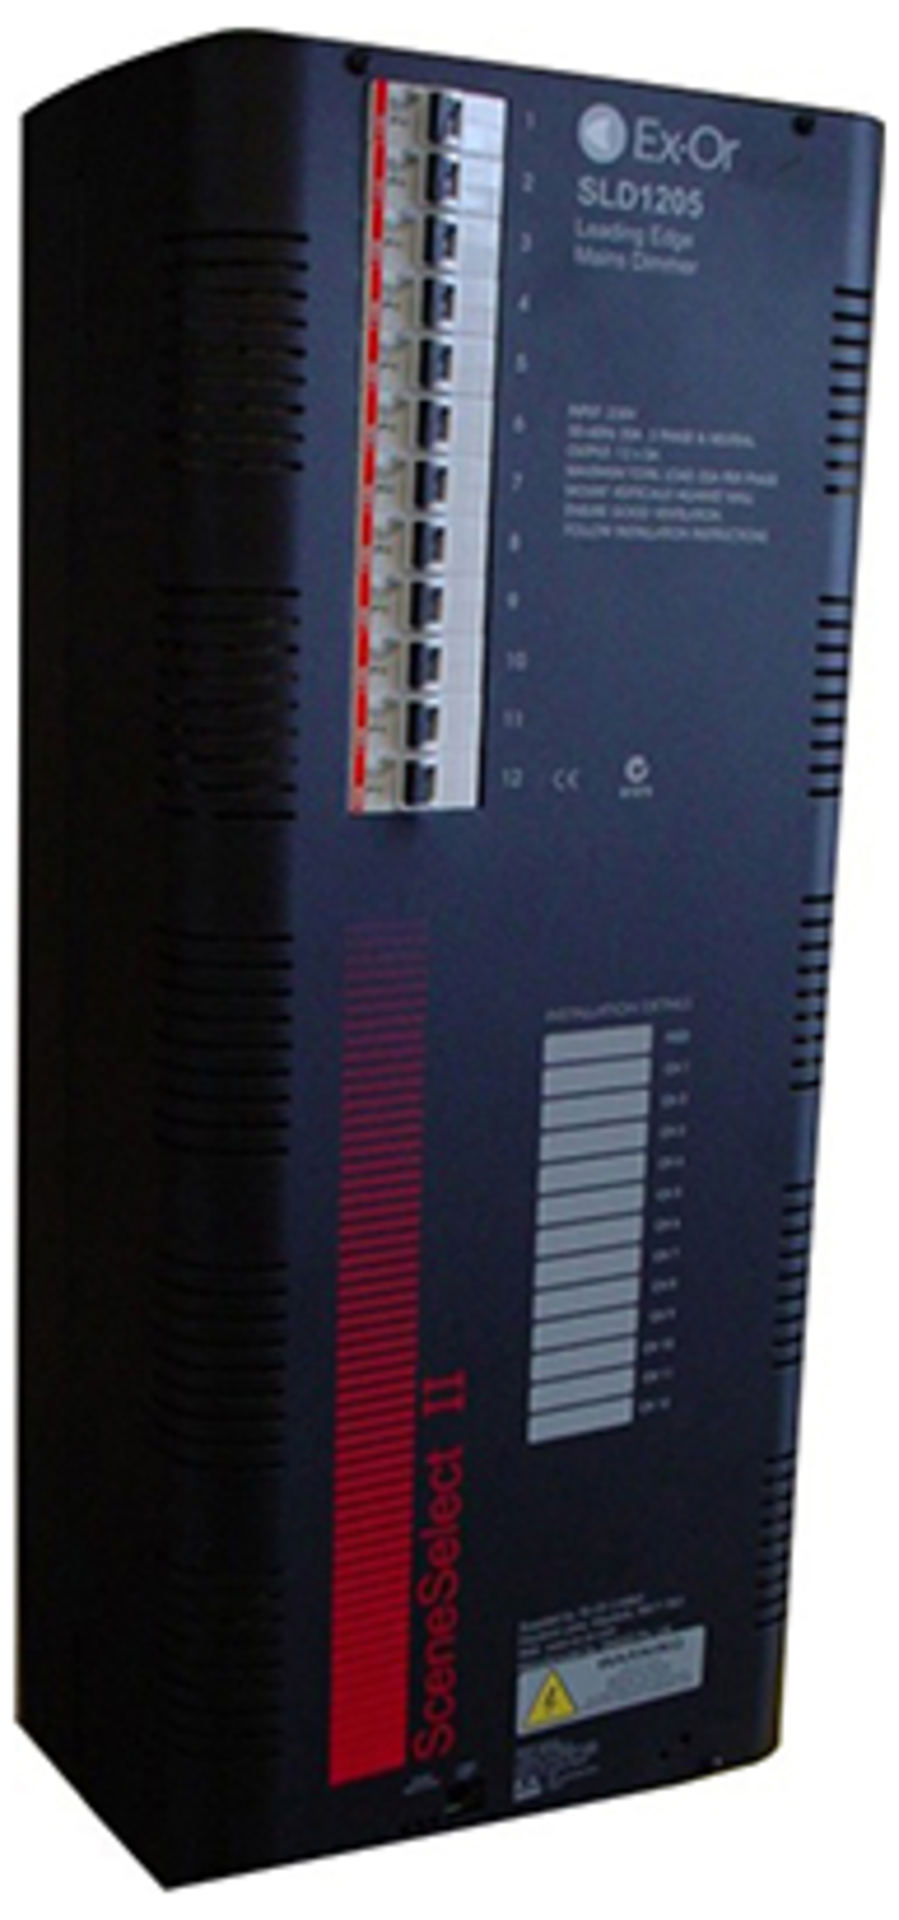 1 x Exor SLD1205 Mains Dimmer With 12 Channels 12x5A - Scene Setting and Dimmer System - RRP £3,600